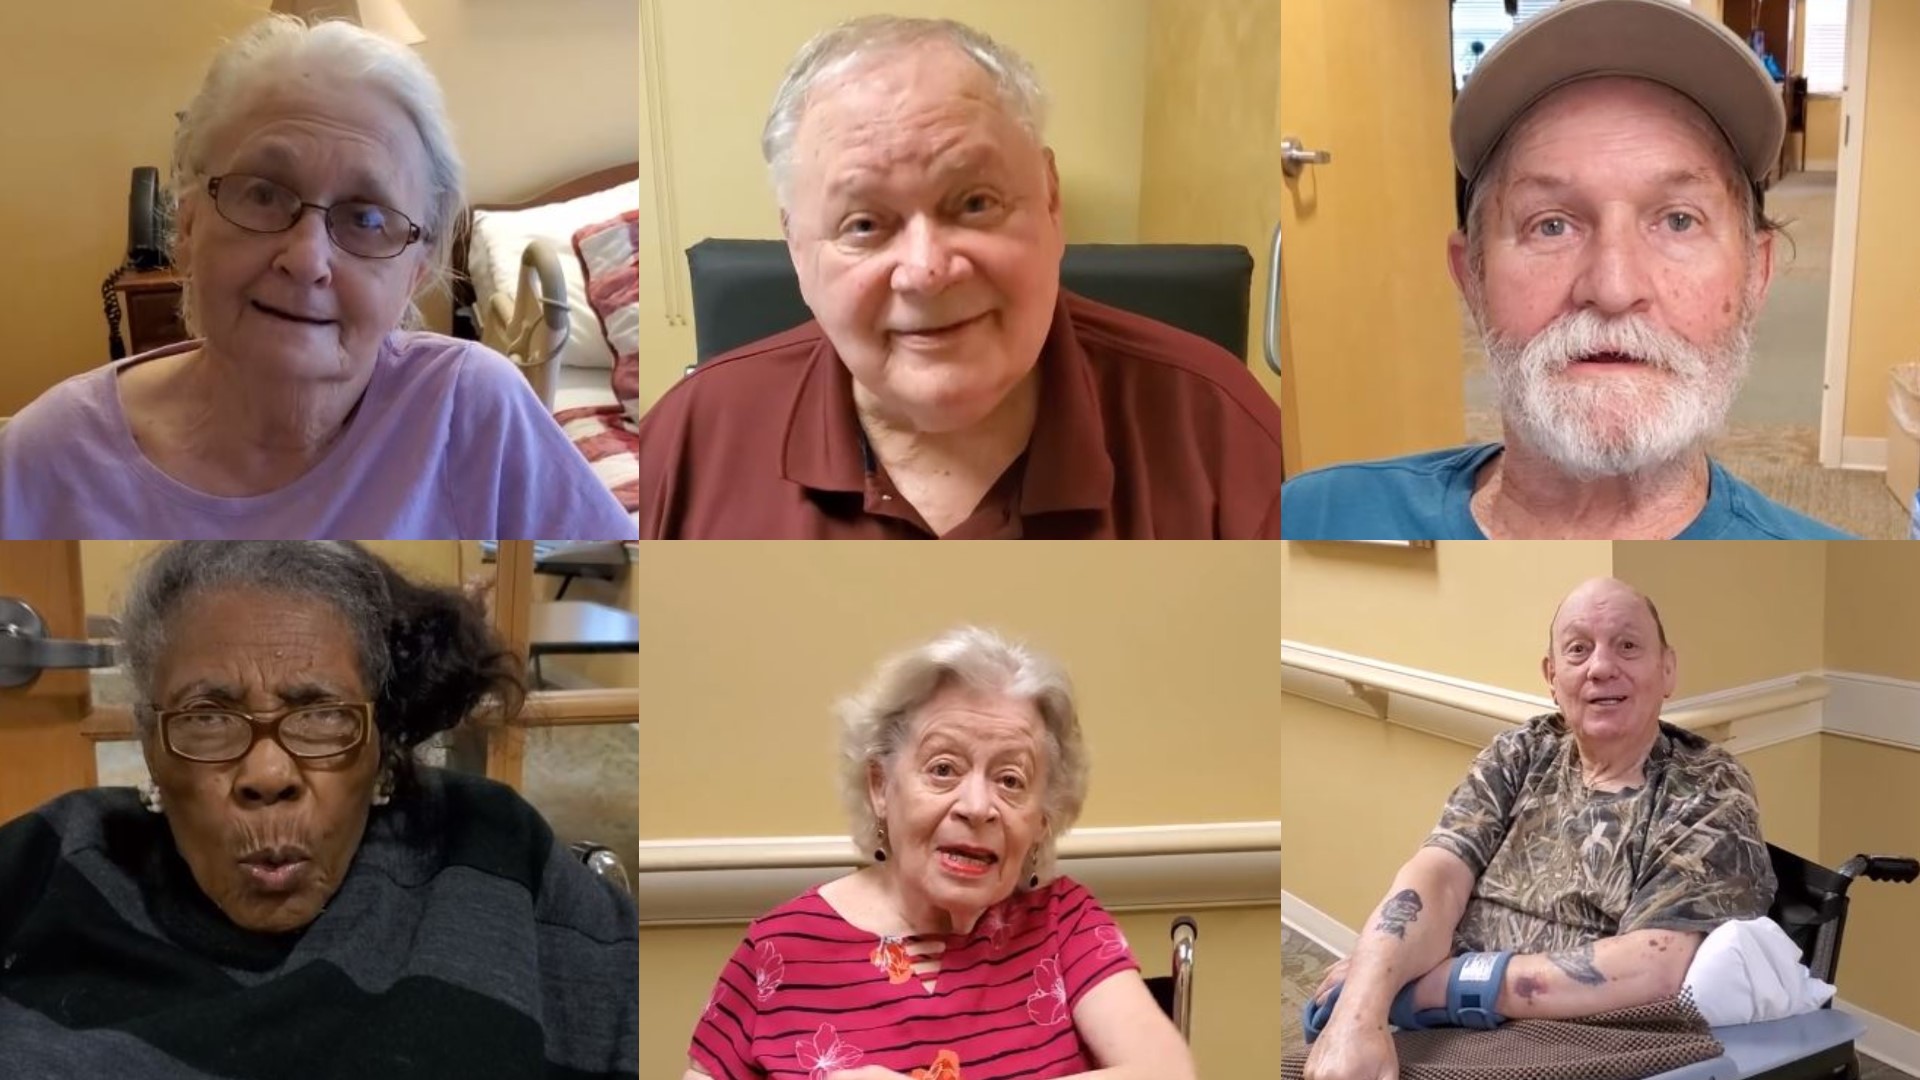 Recently, the facility posted videos of their residents singing 'He's Got the Whole World.' It's a challenge Tyler Perry started to spread light during COVID-19.